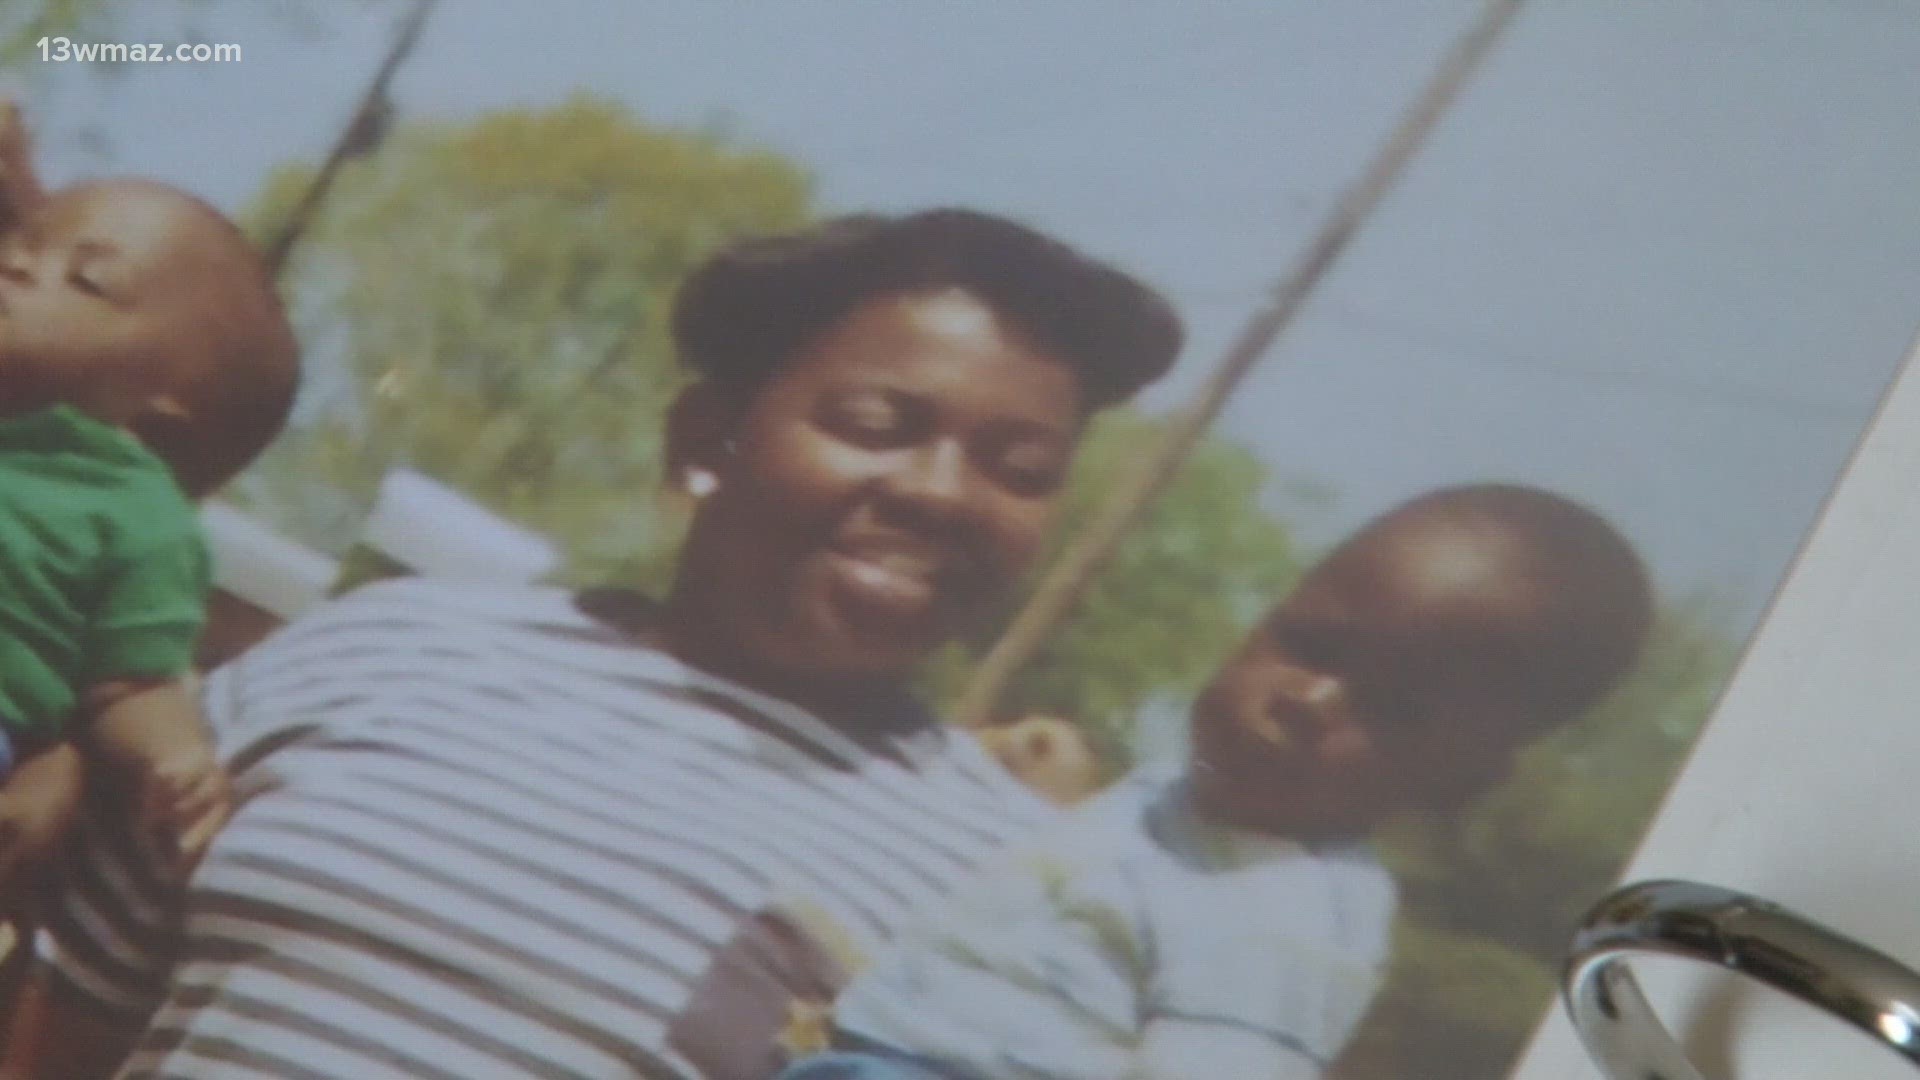 29-year-old mother of four Glenda Gay was shot and killed June 19, 1994. Her daughter says they still have no idea who killed her and why.